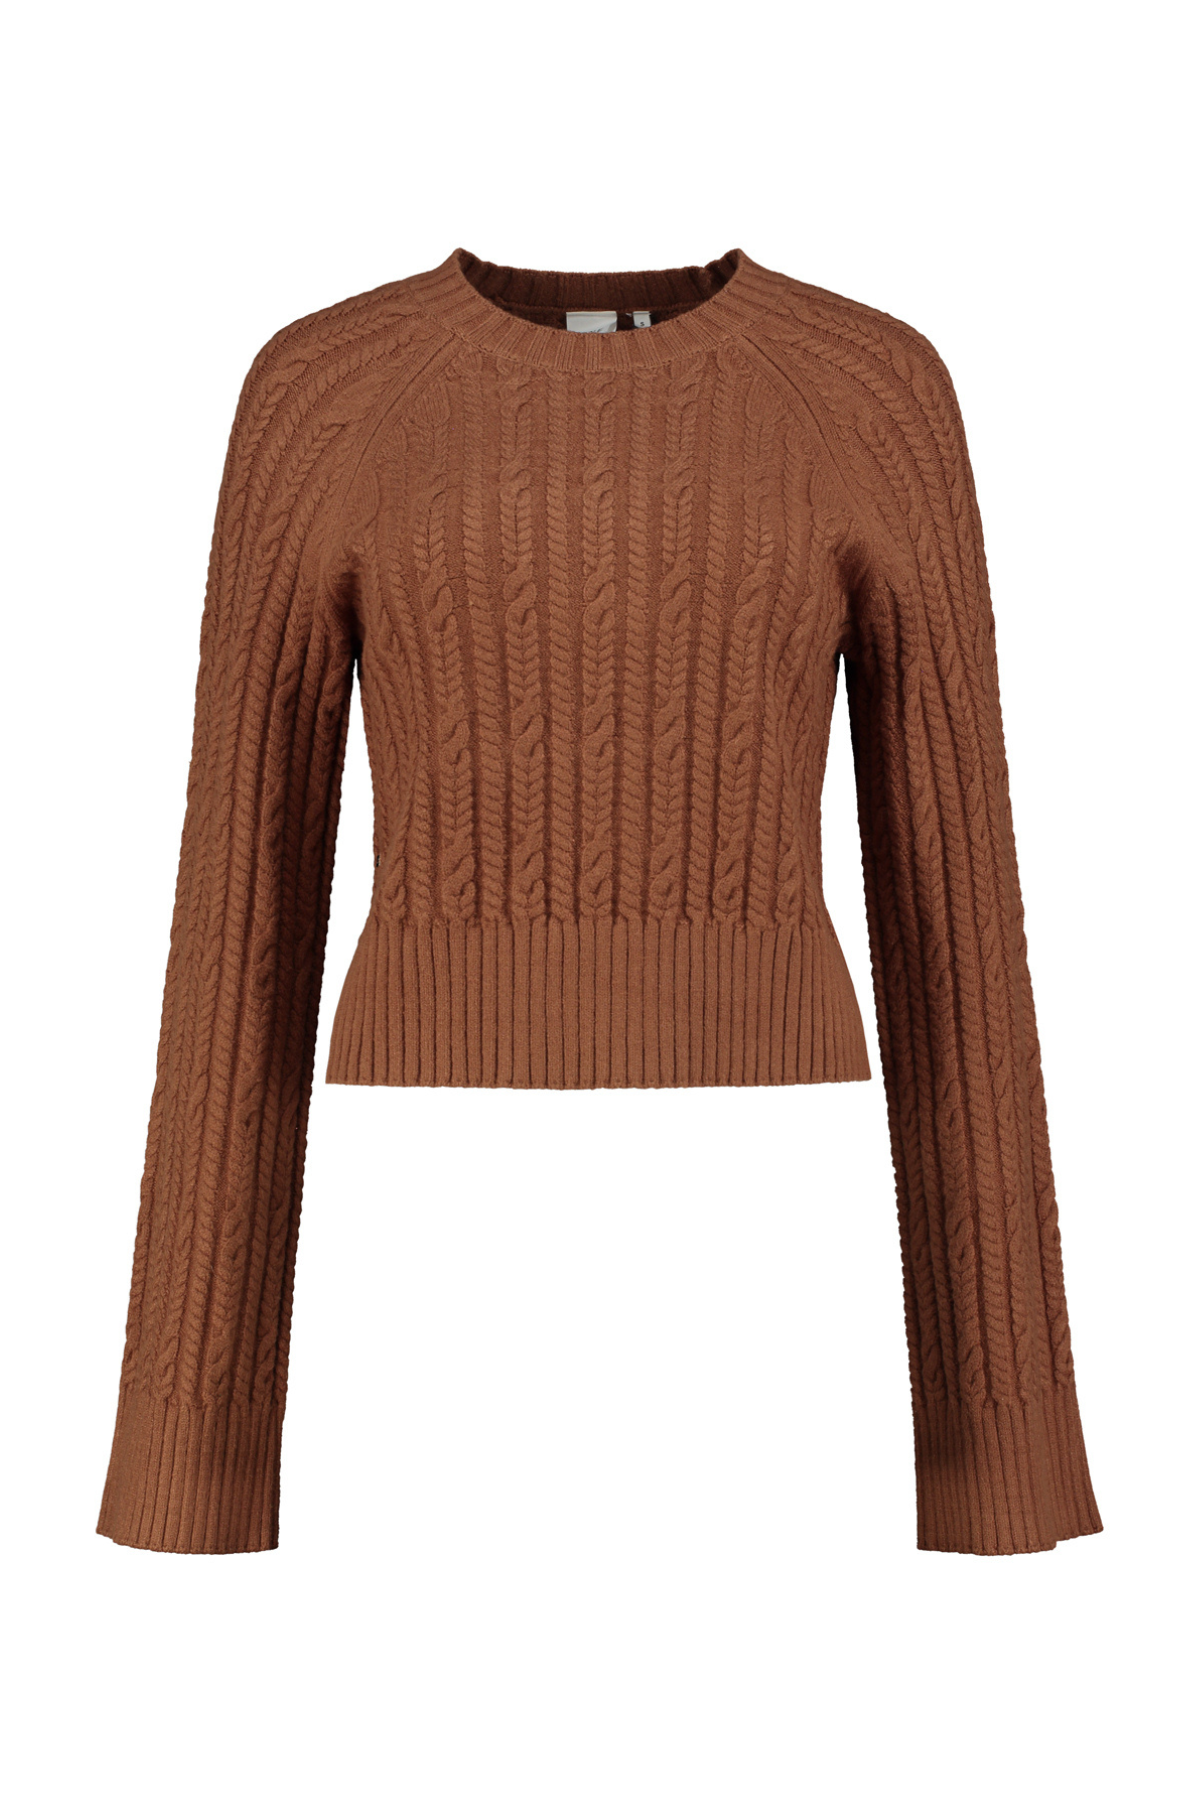 BLAKE cable knit crewneck sweater - Nuthatch